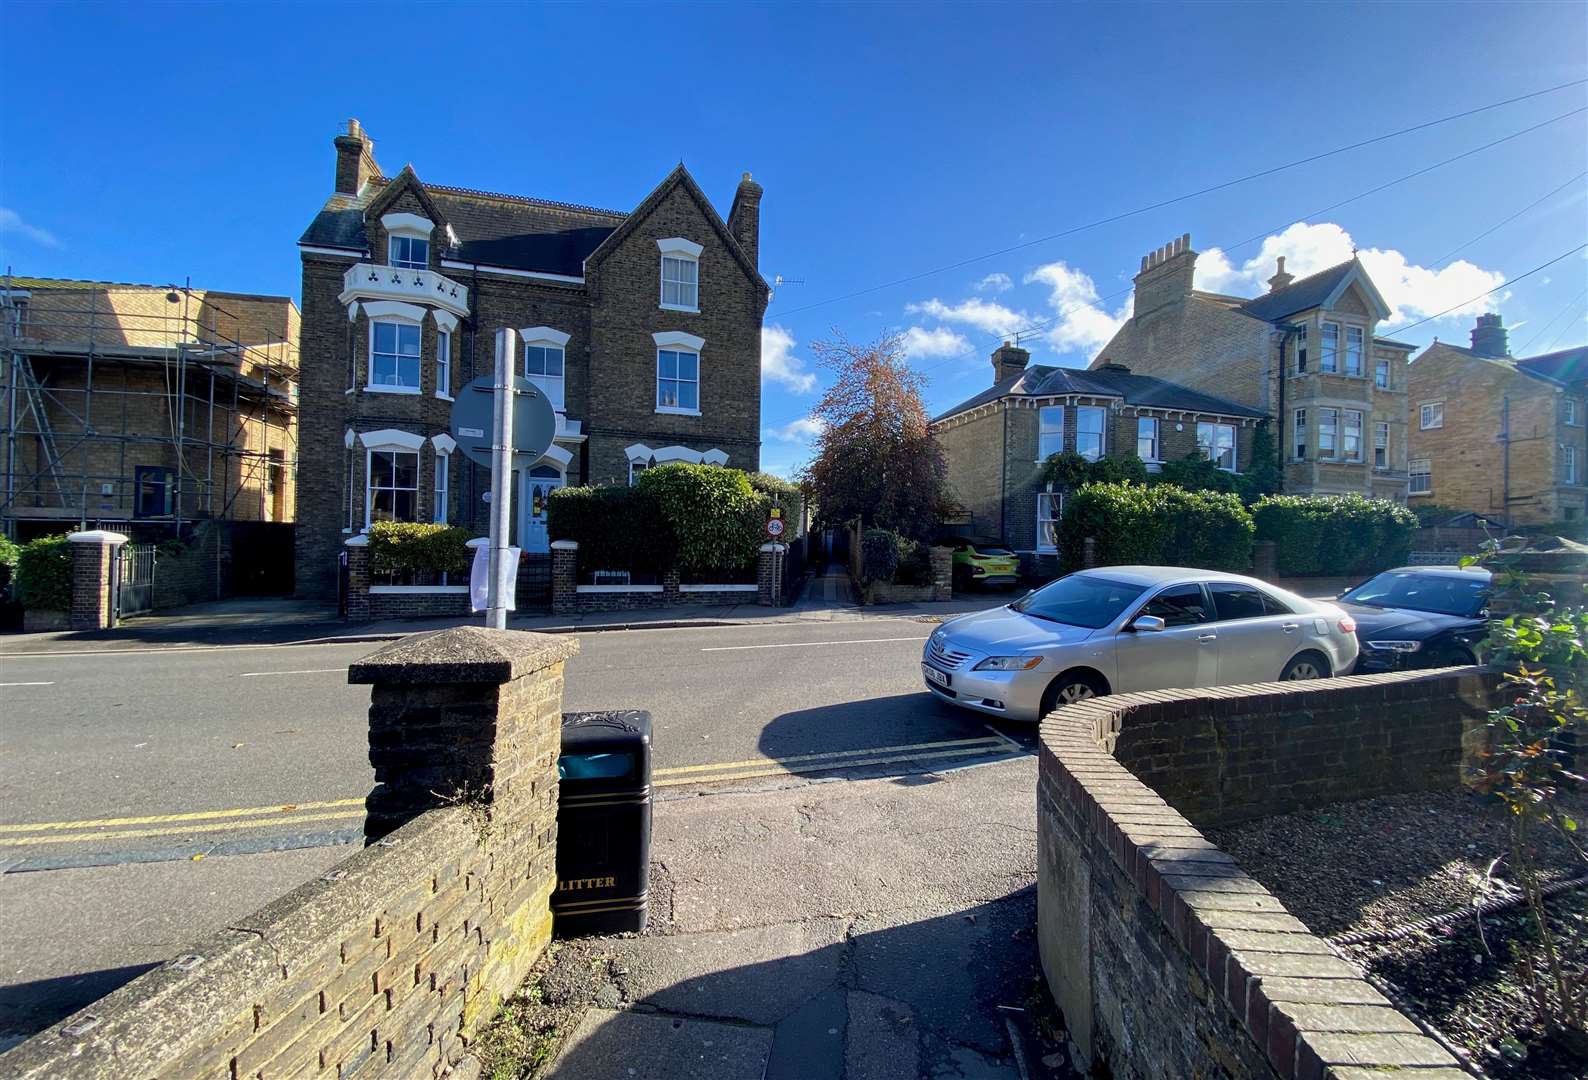 Councillors believe it will make it easier to enforce the 20mph-zone through the town which they hope will improve safety and encourage healthier travel options. Picture: Faversham Town Council/Space Syntax